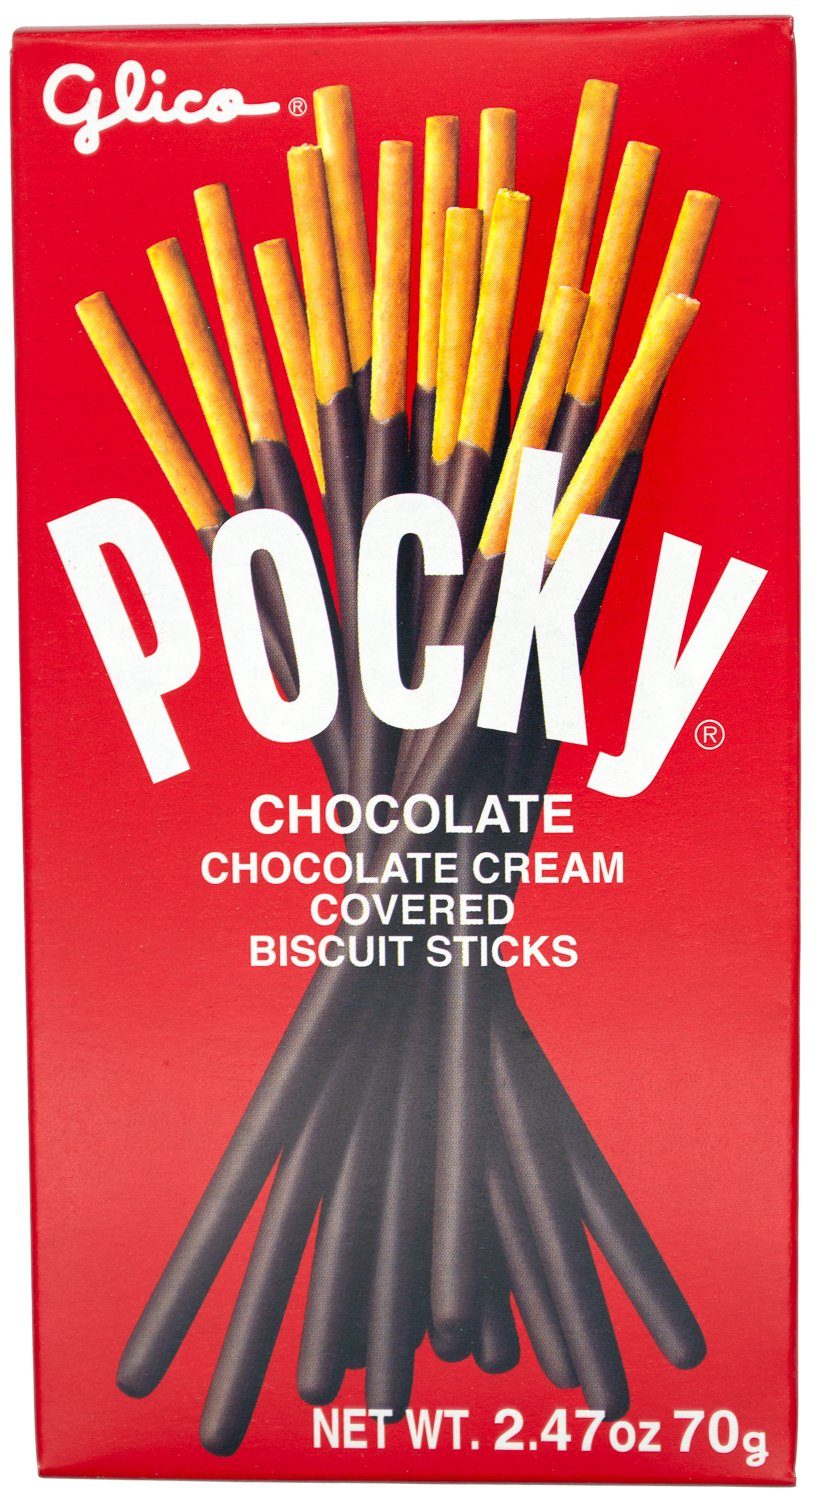 Pocky Cream Covered Biscuit Sticks Glico Chocolate 2.47 Ounce 